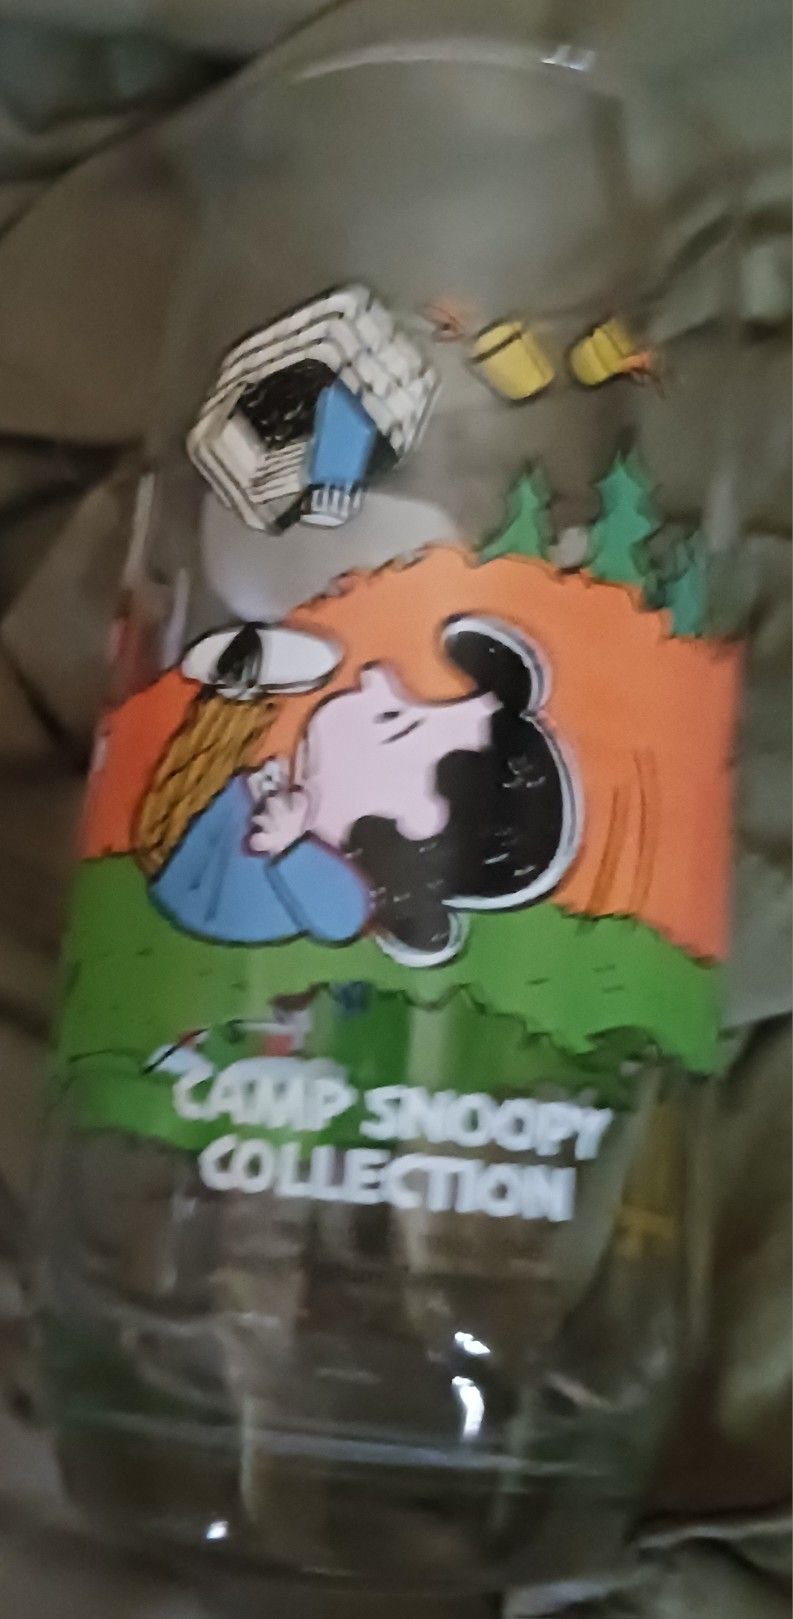 McDonalds Camp Snoopy Collection Drinking Glass 1965

